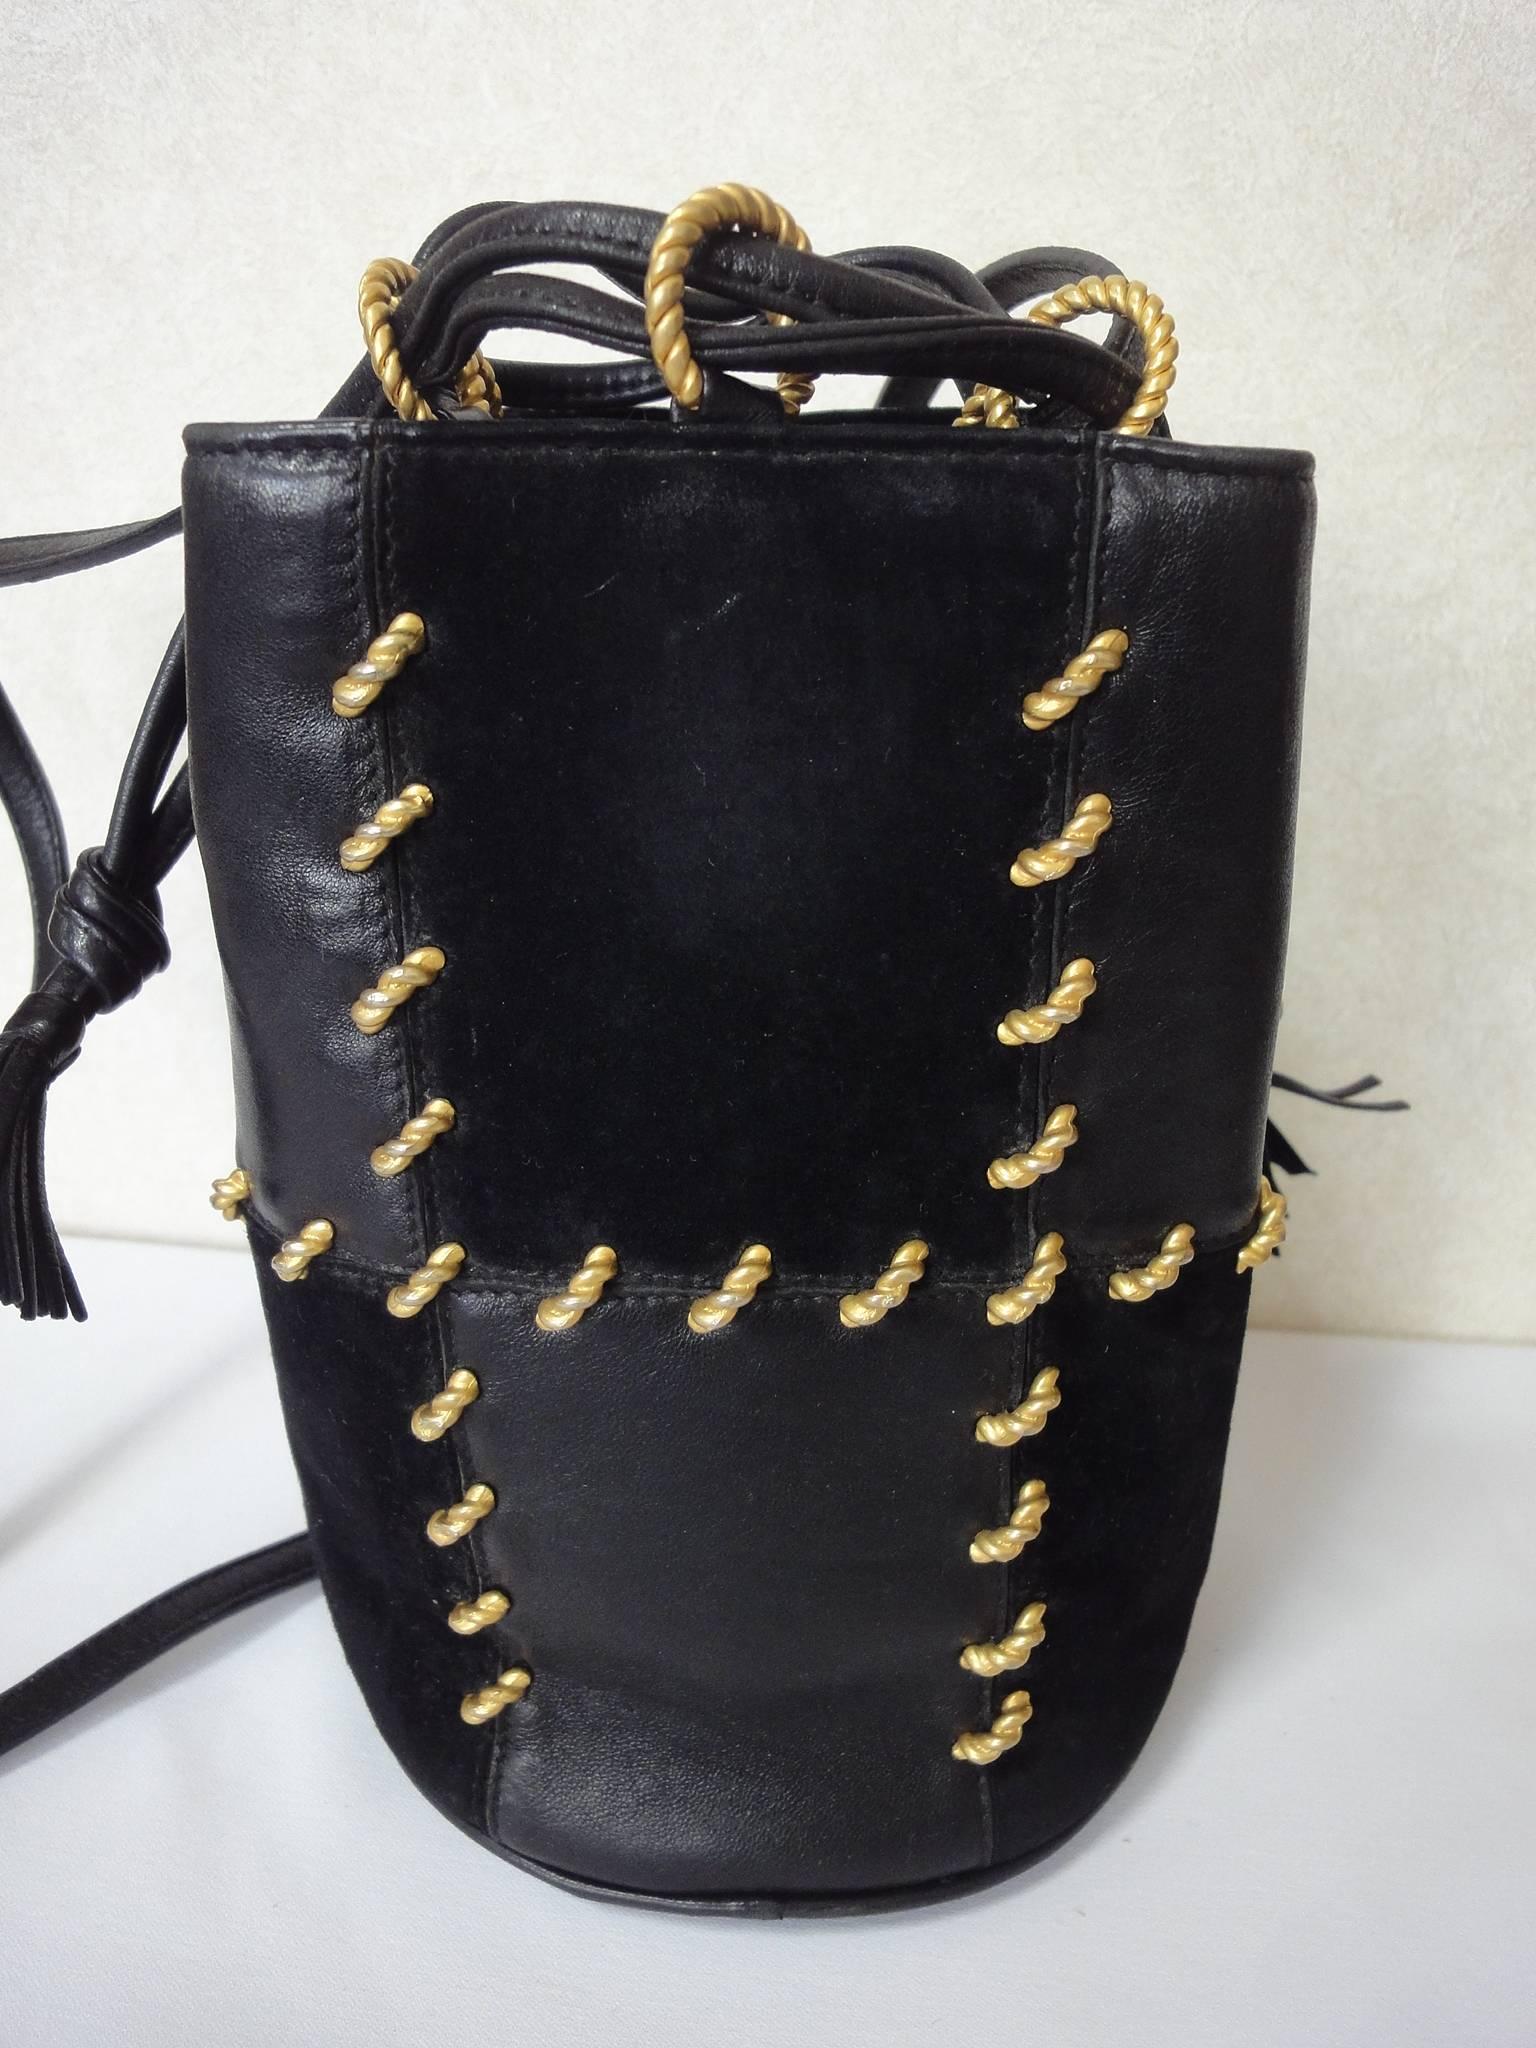 Vintage Salvatore Ferragamo black smooth and suede leather combination mini shoulder purse. Hobo bucket style bag. Great for daily use.

Introducing another masterpiece from Salvatore Ferragamo back in the early 90s.
Black smooth and suede